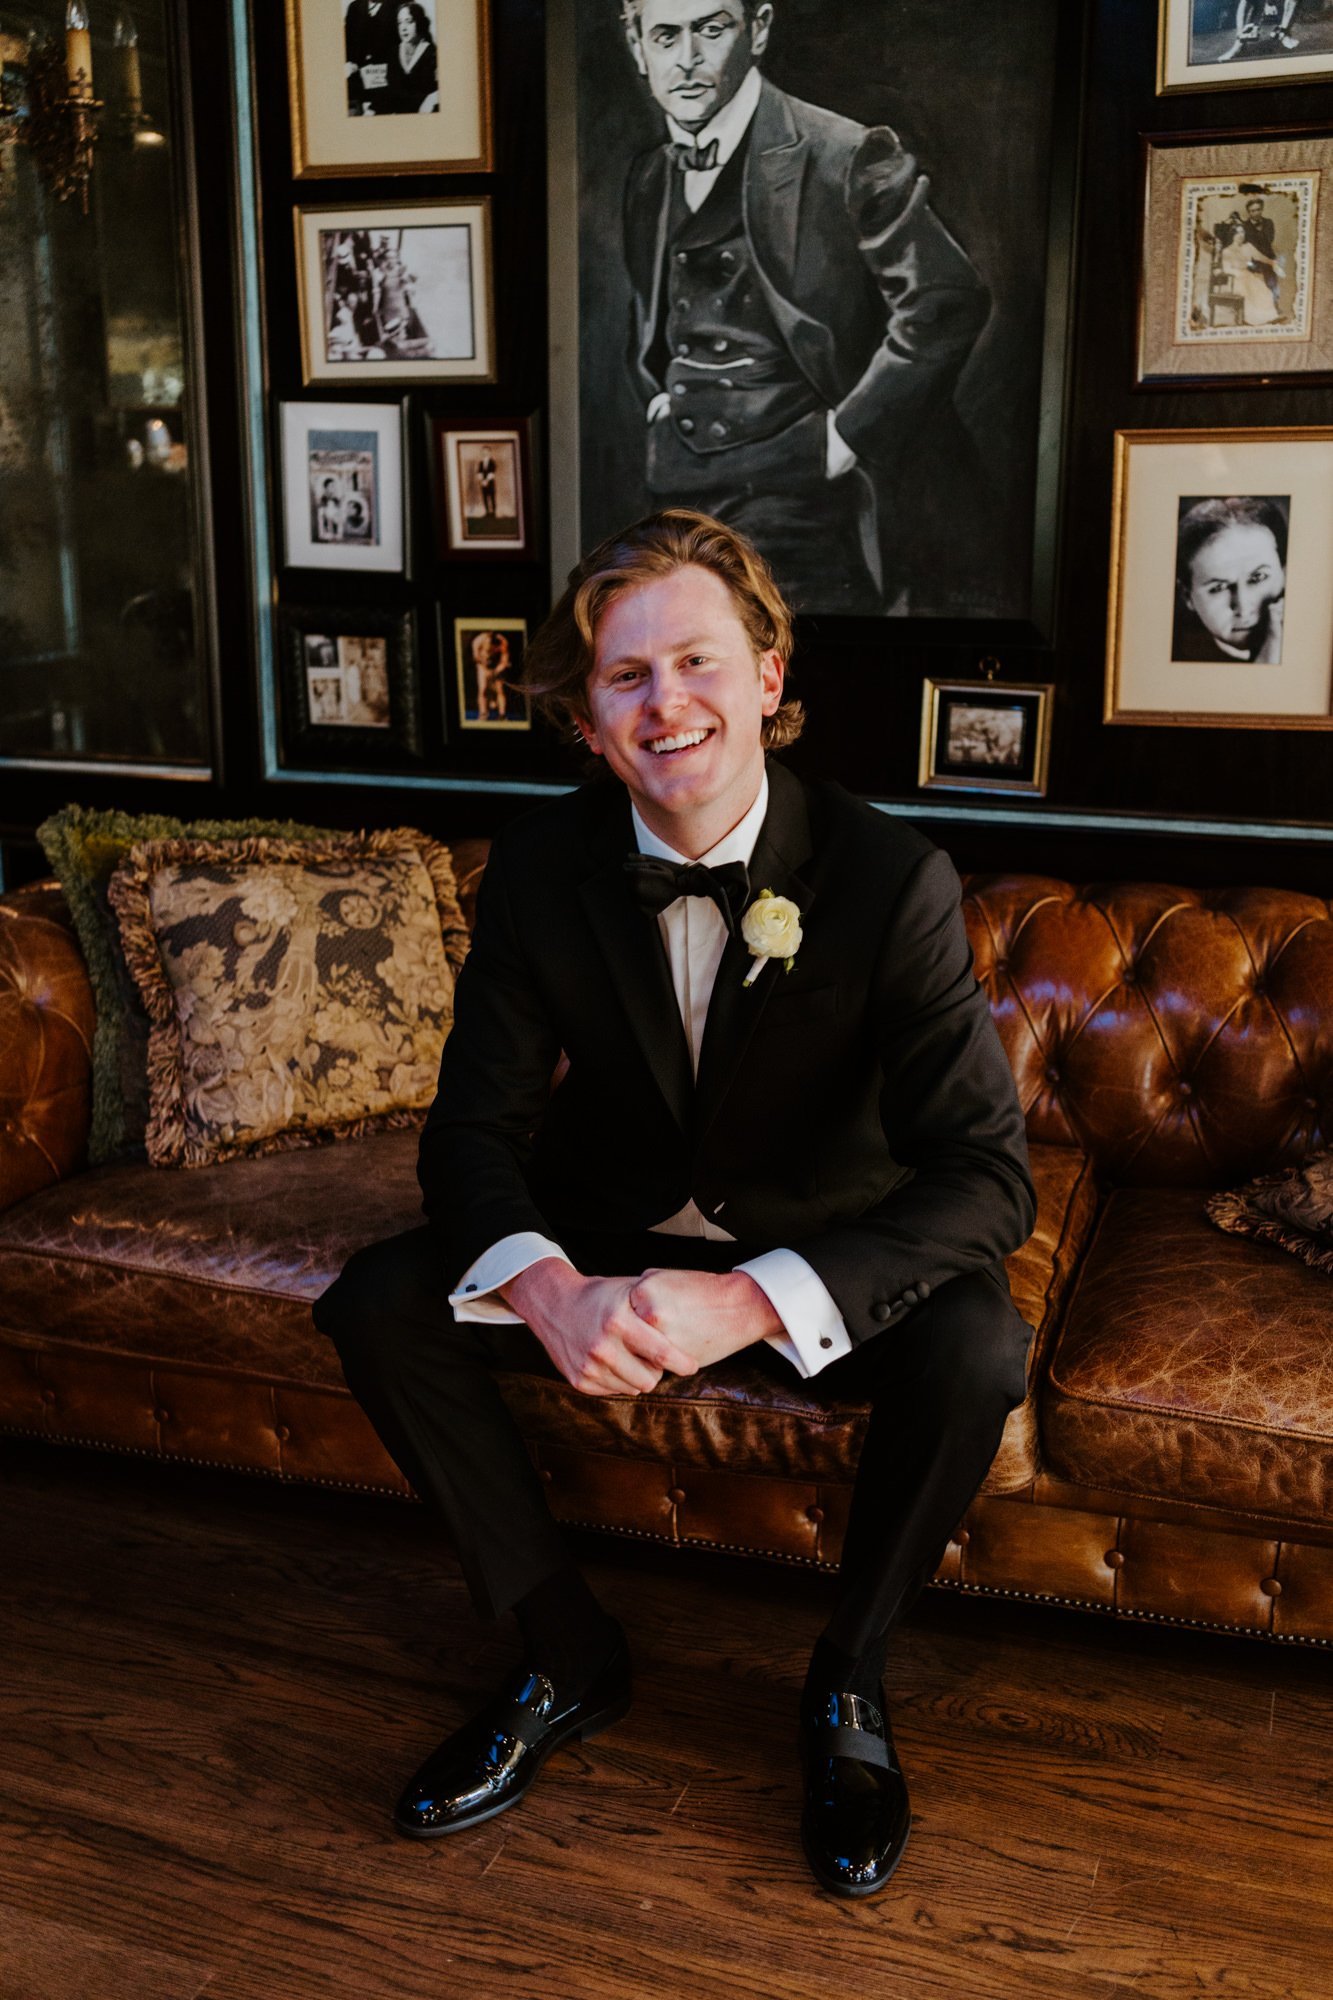 Groom portrait at The Houdini Estate wedding, Los Angeles wedding photography by Tida Svy